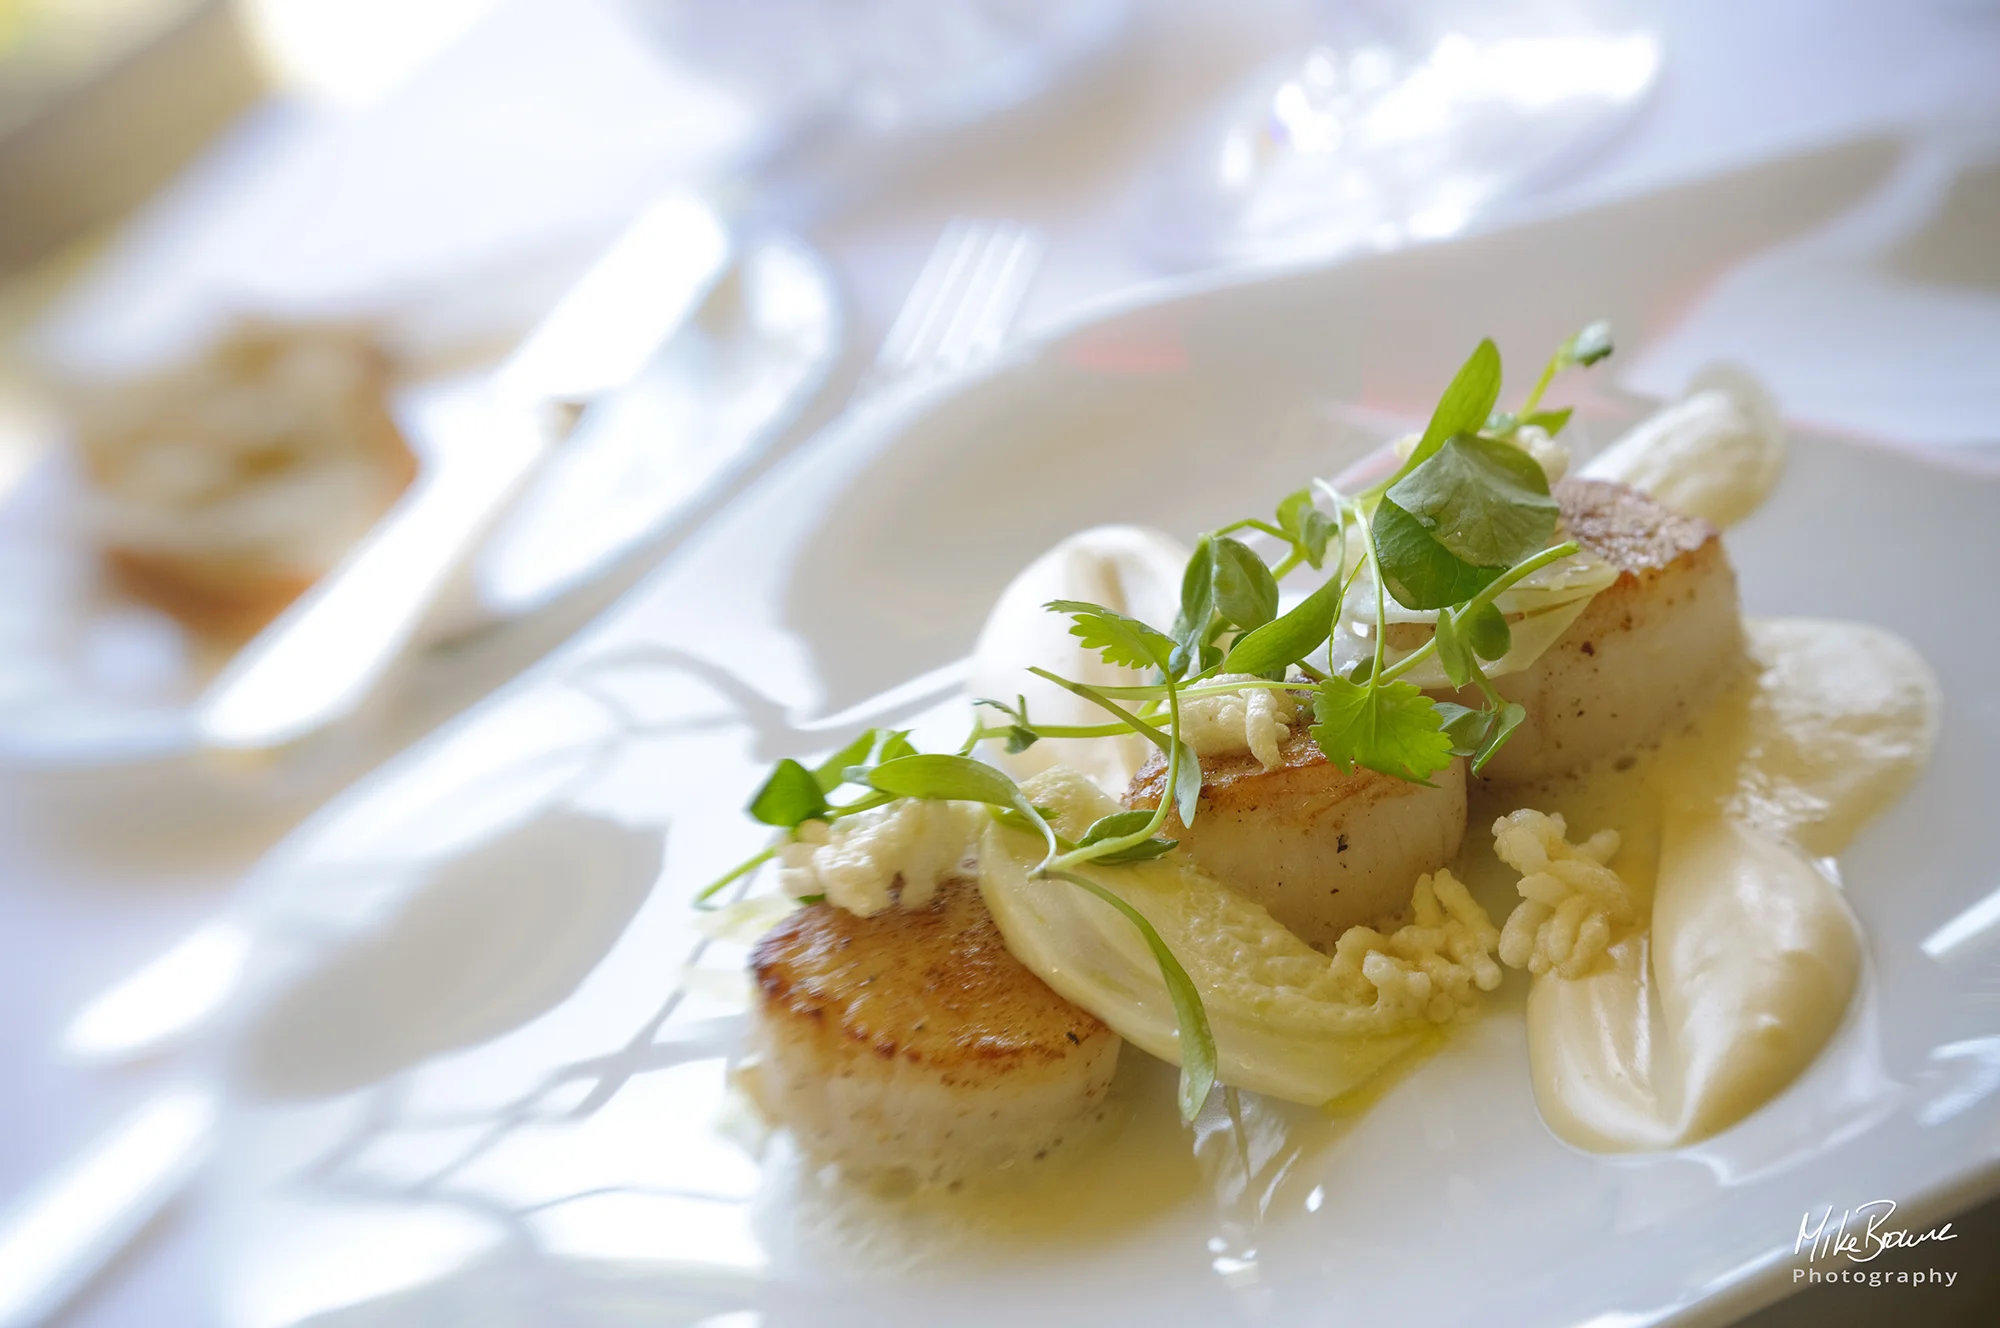 Three seared scallops with puffed rice, foam and herbs on a white plate